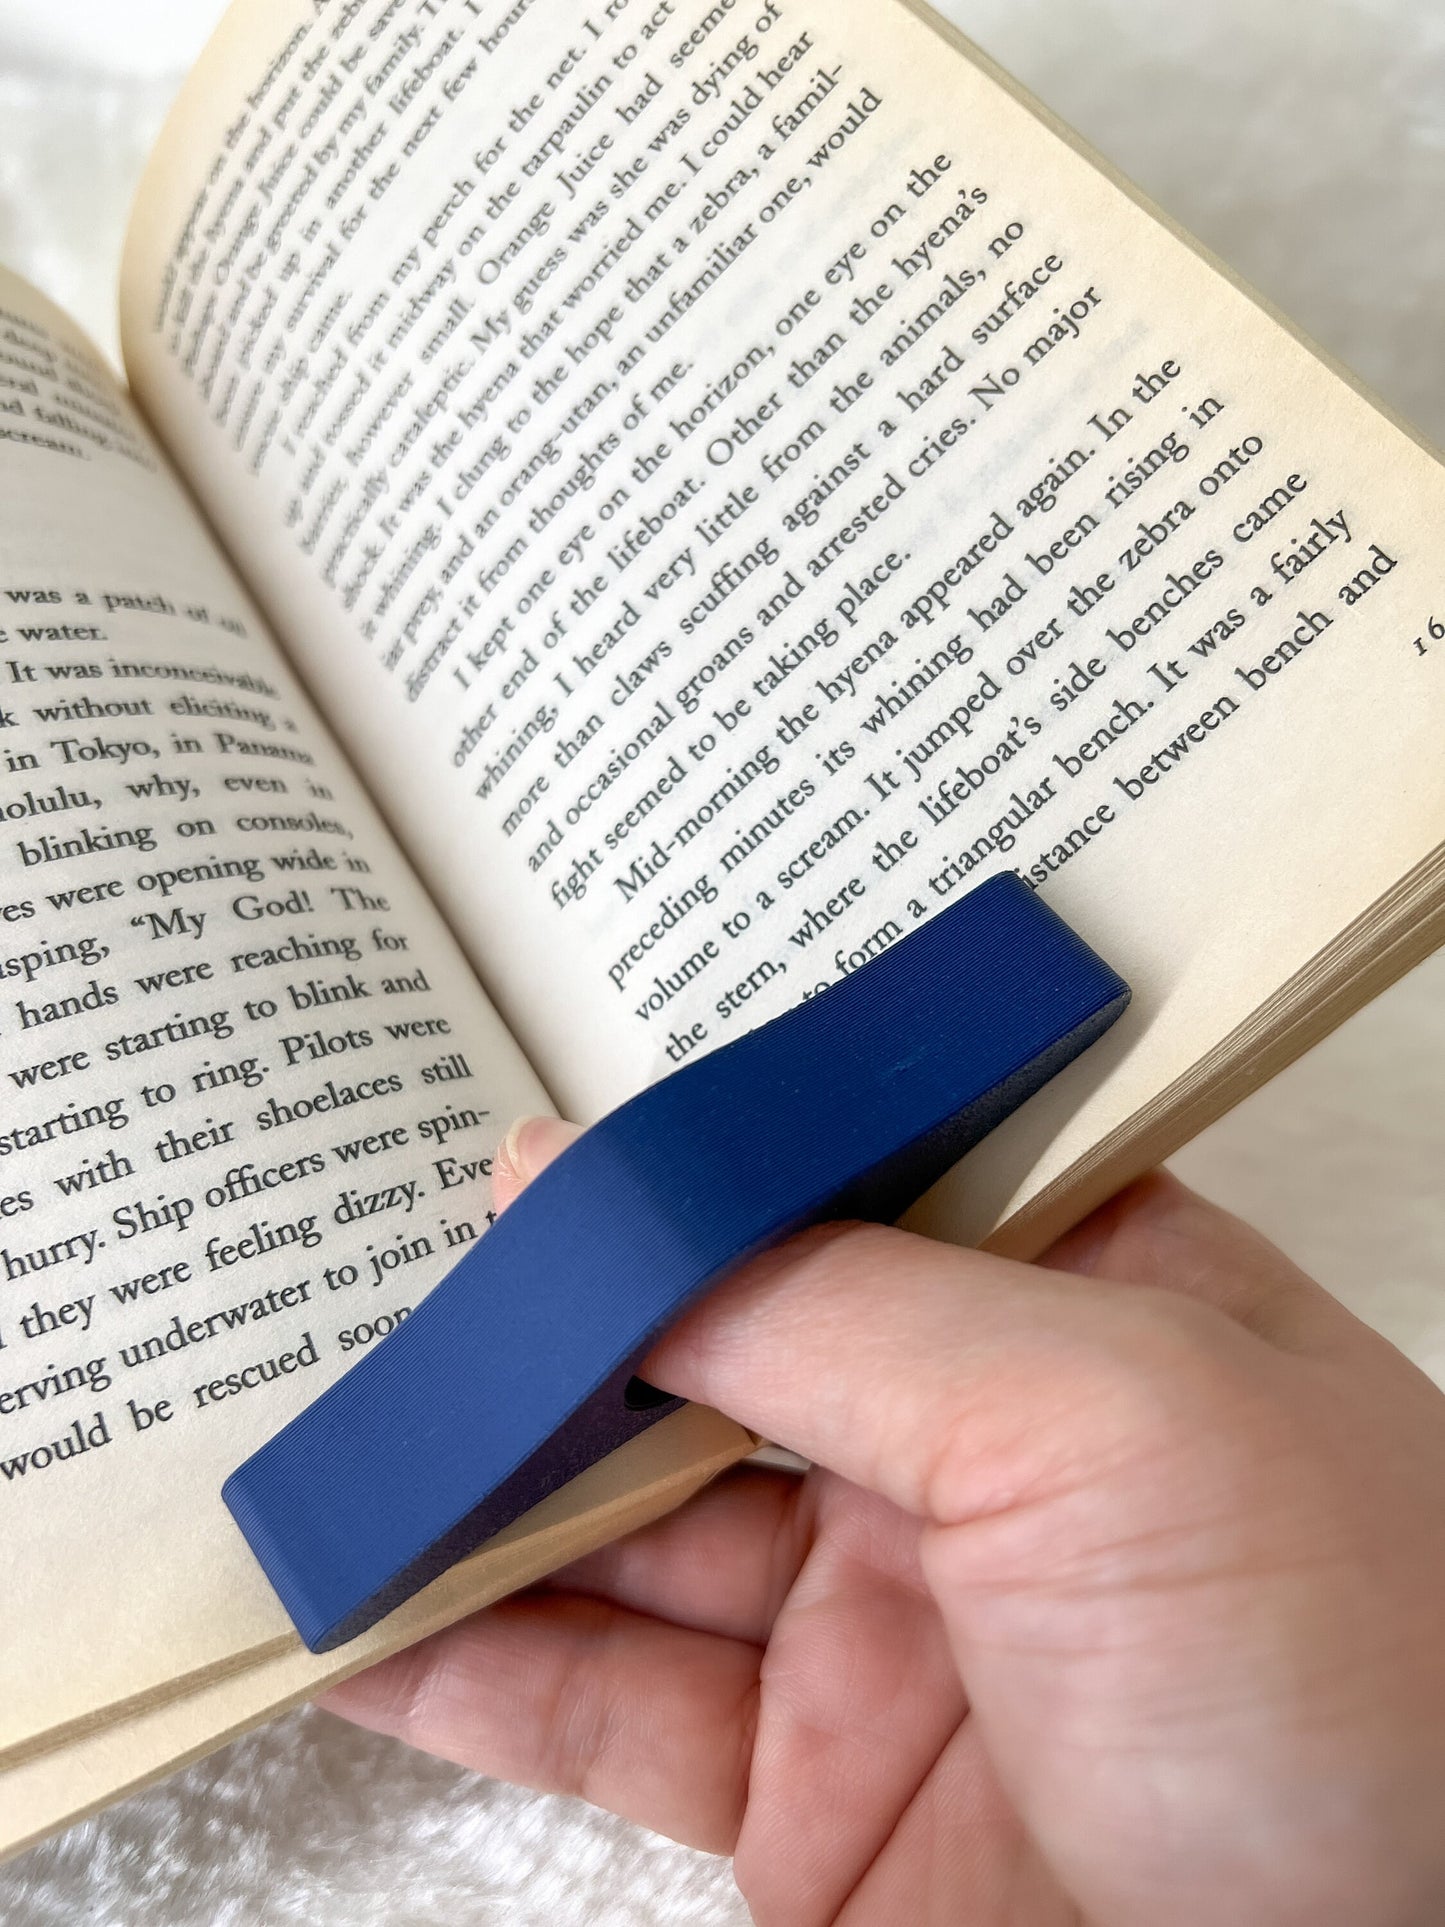 BOOK PAGE HOLDER | Bookmark, Thumb Bookmark, Page Holder, Book Spreader, Book Lover gifts